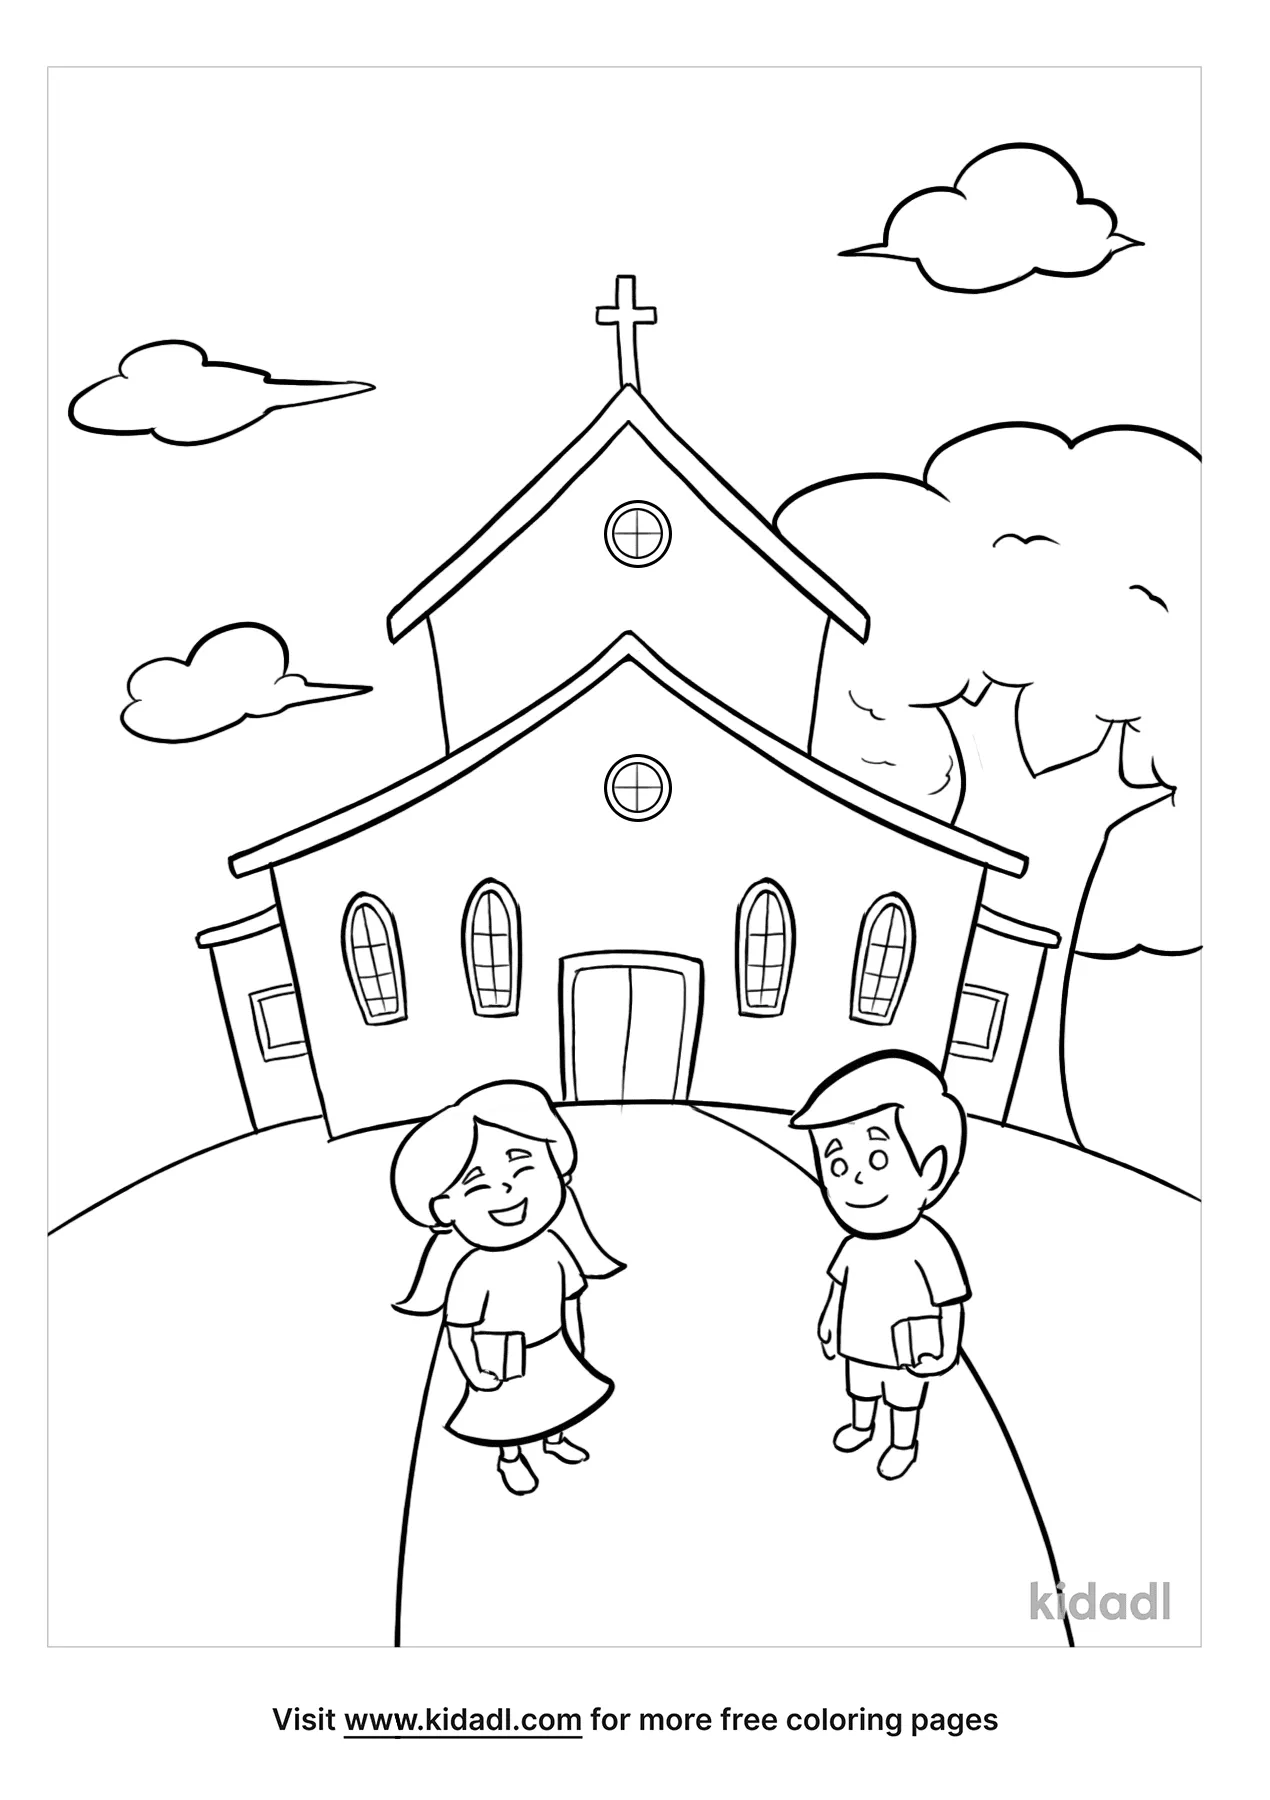 Free wele to sunday school coloring page coloring page printables